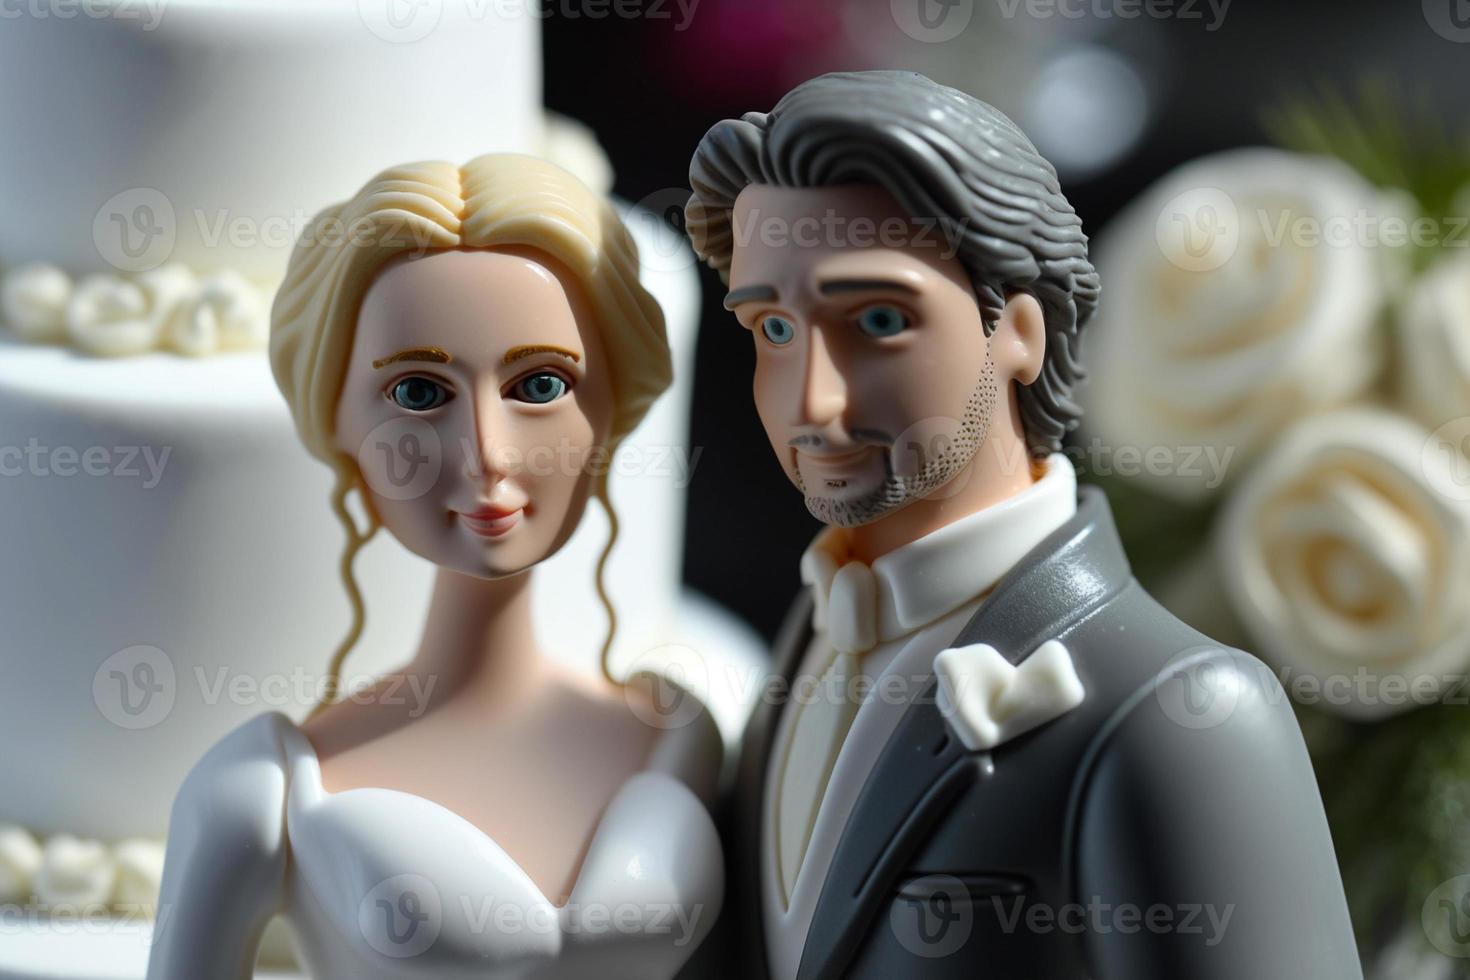 Bride and Groom on top of cake or dolls on top of cake. Nostalgia and memories of a good happy marriage photo